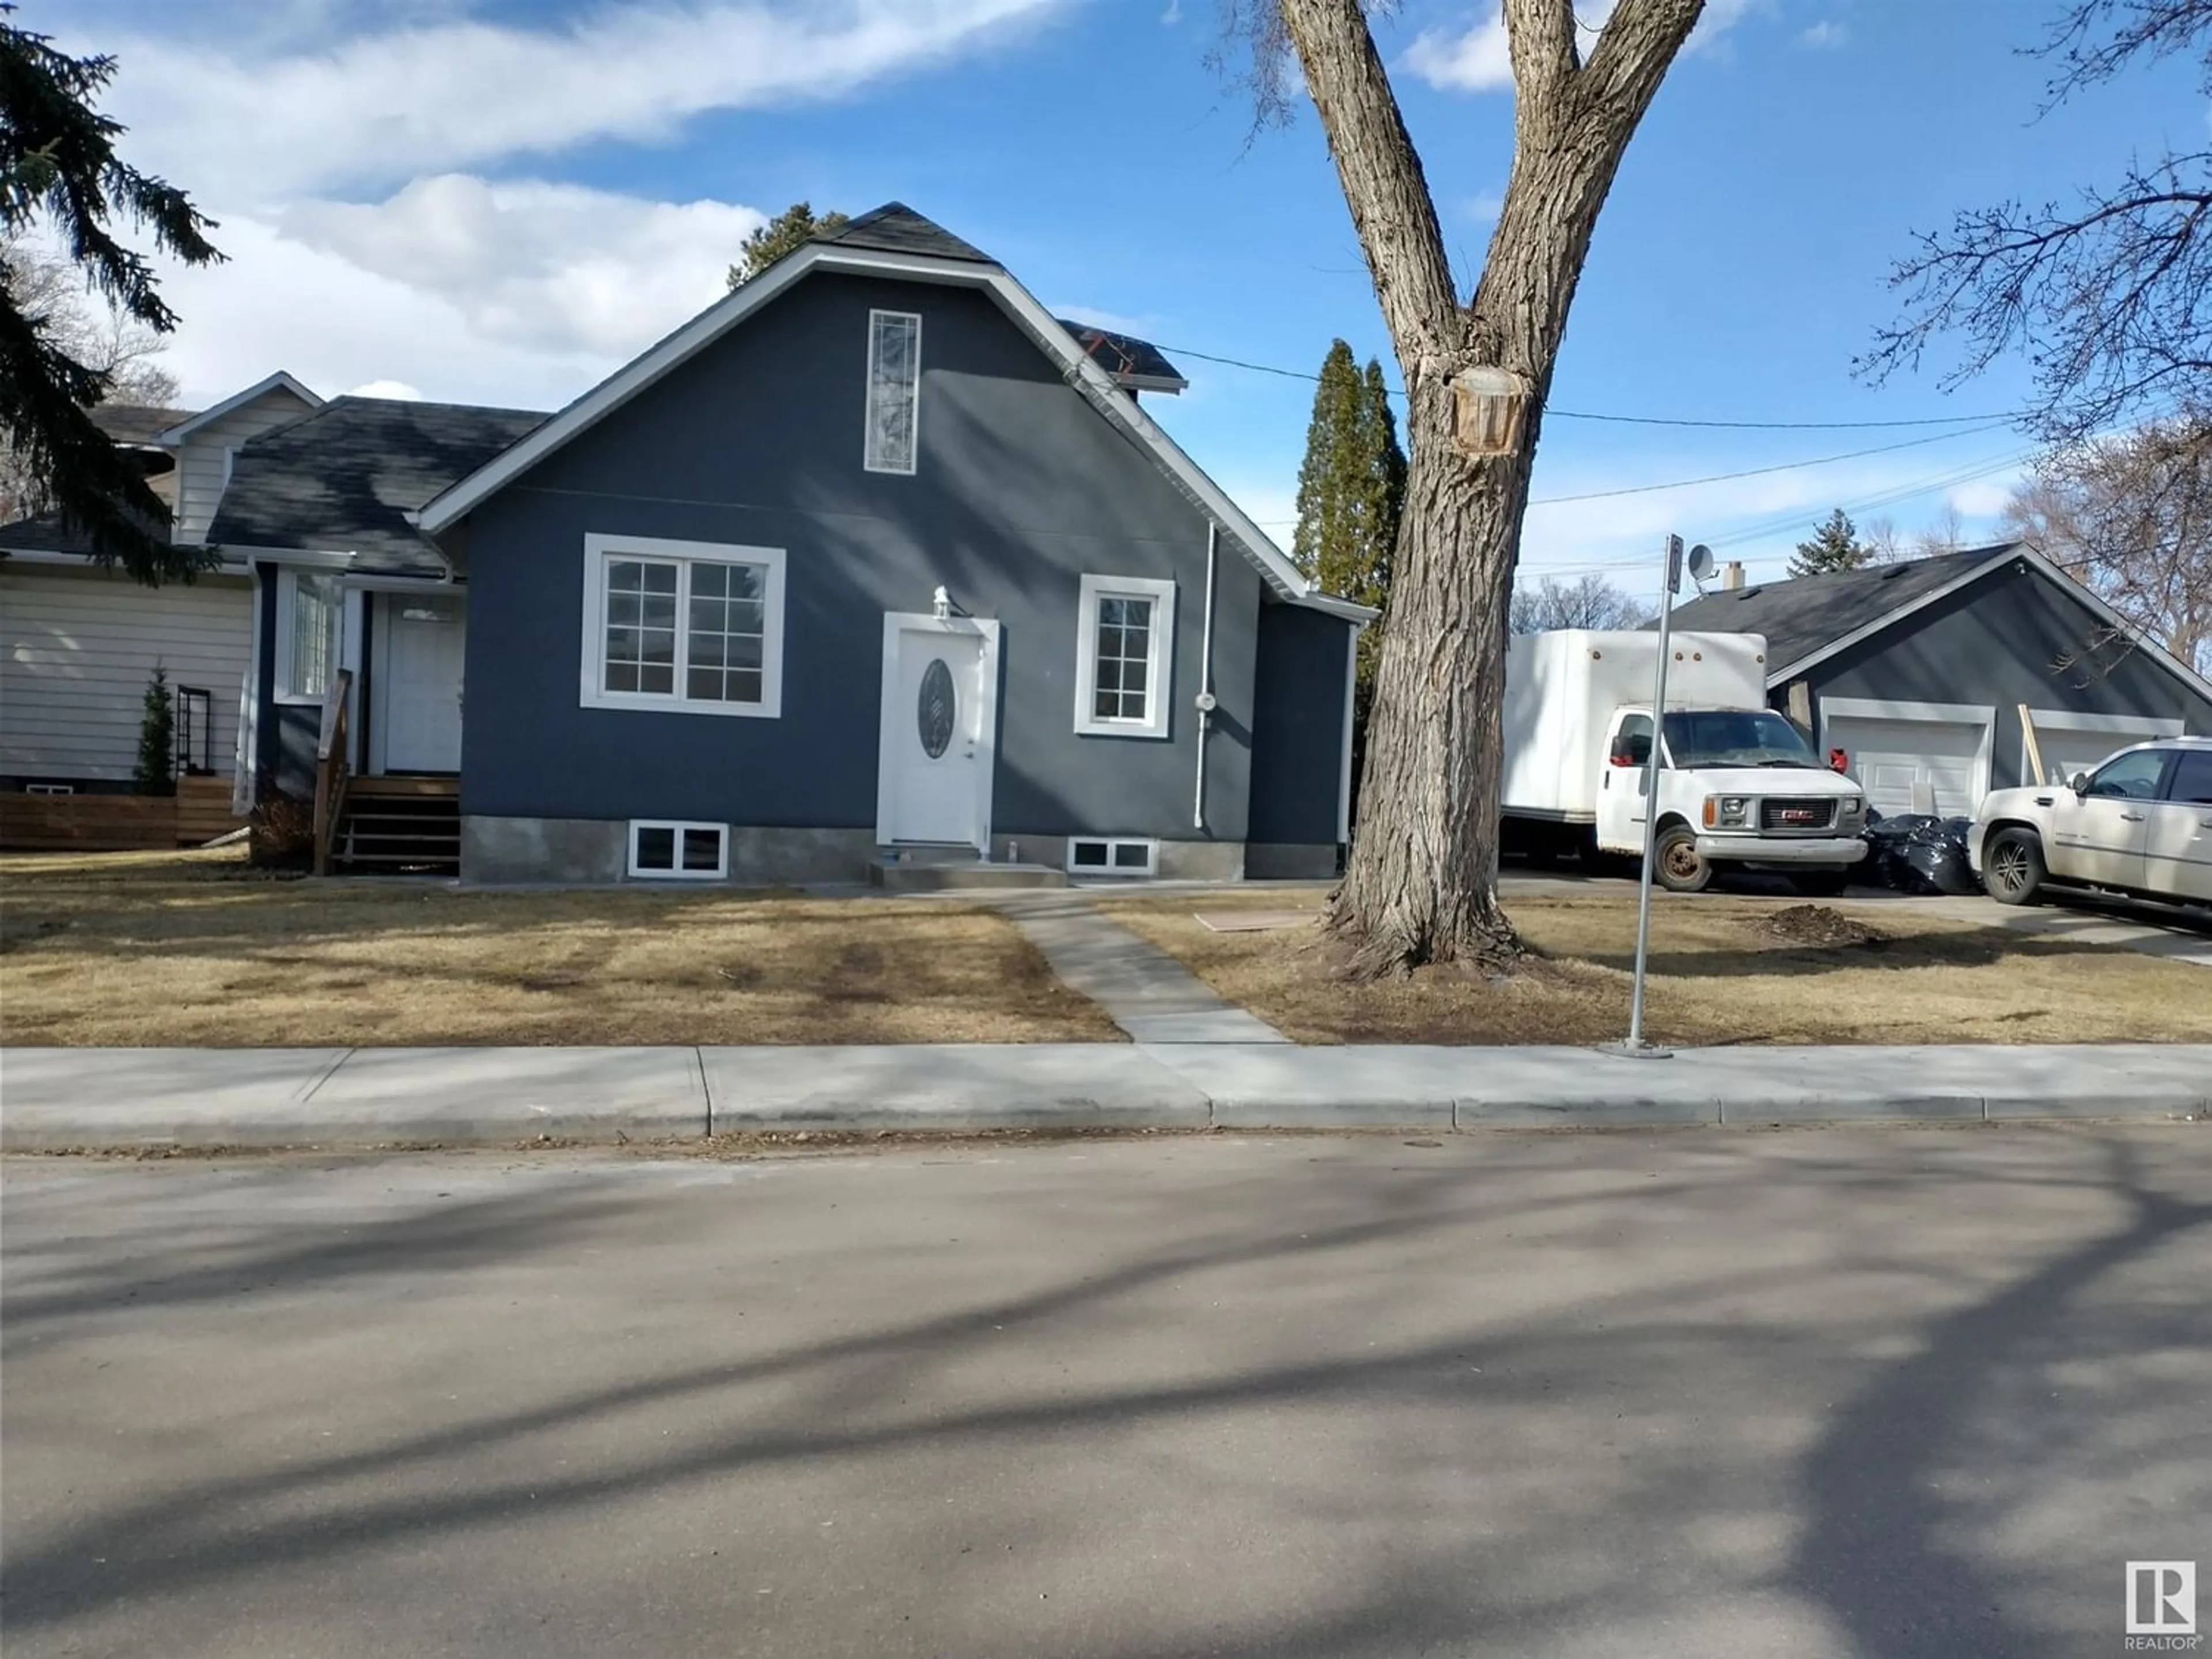 Frontside or backside of a home for 11503 66 ST NW, Edmonton Alberta T5B1J1